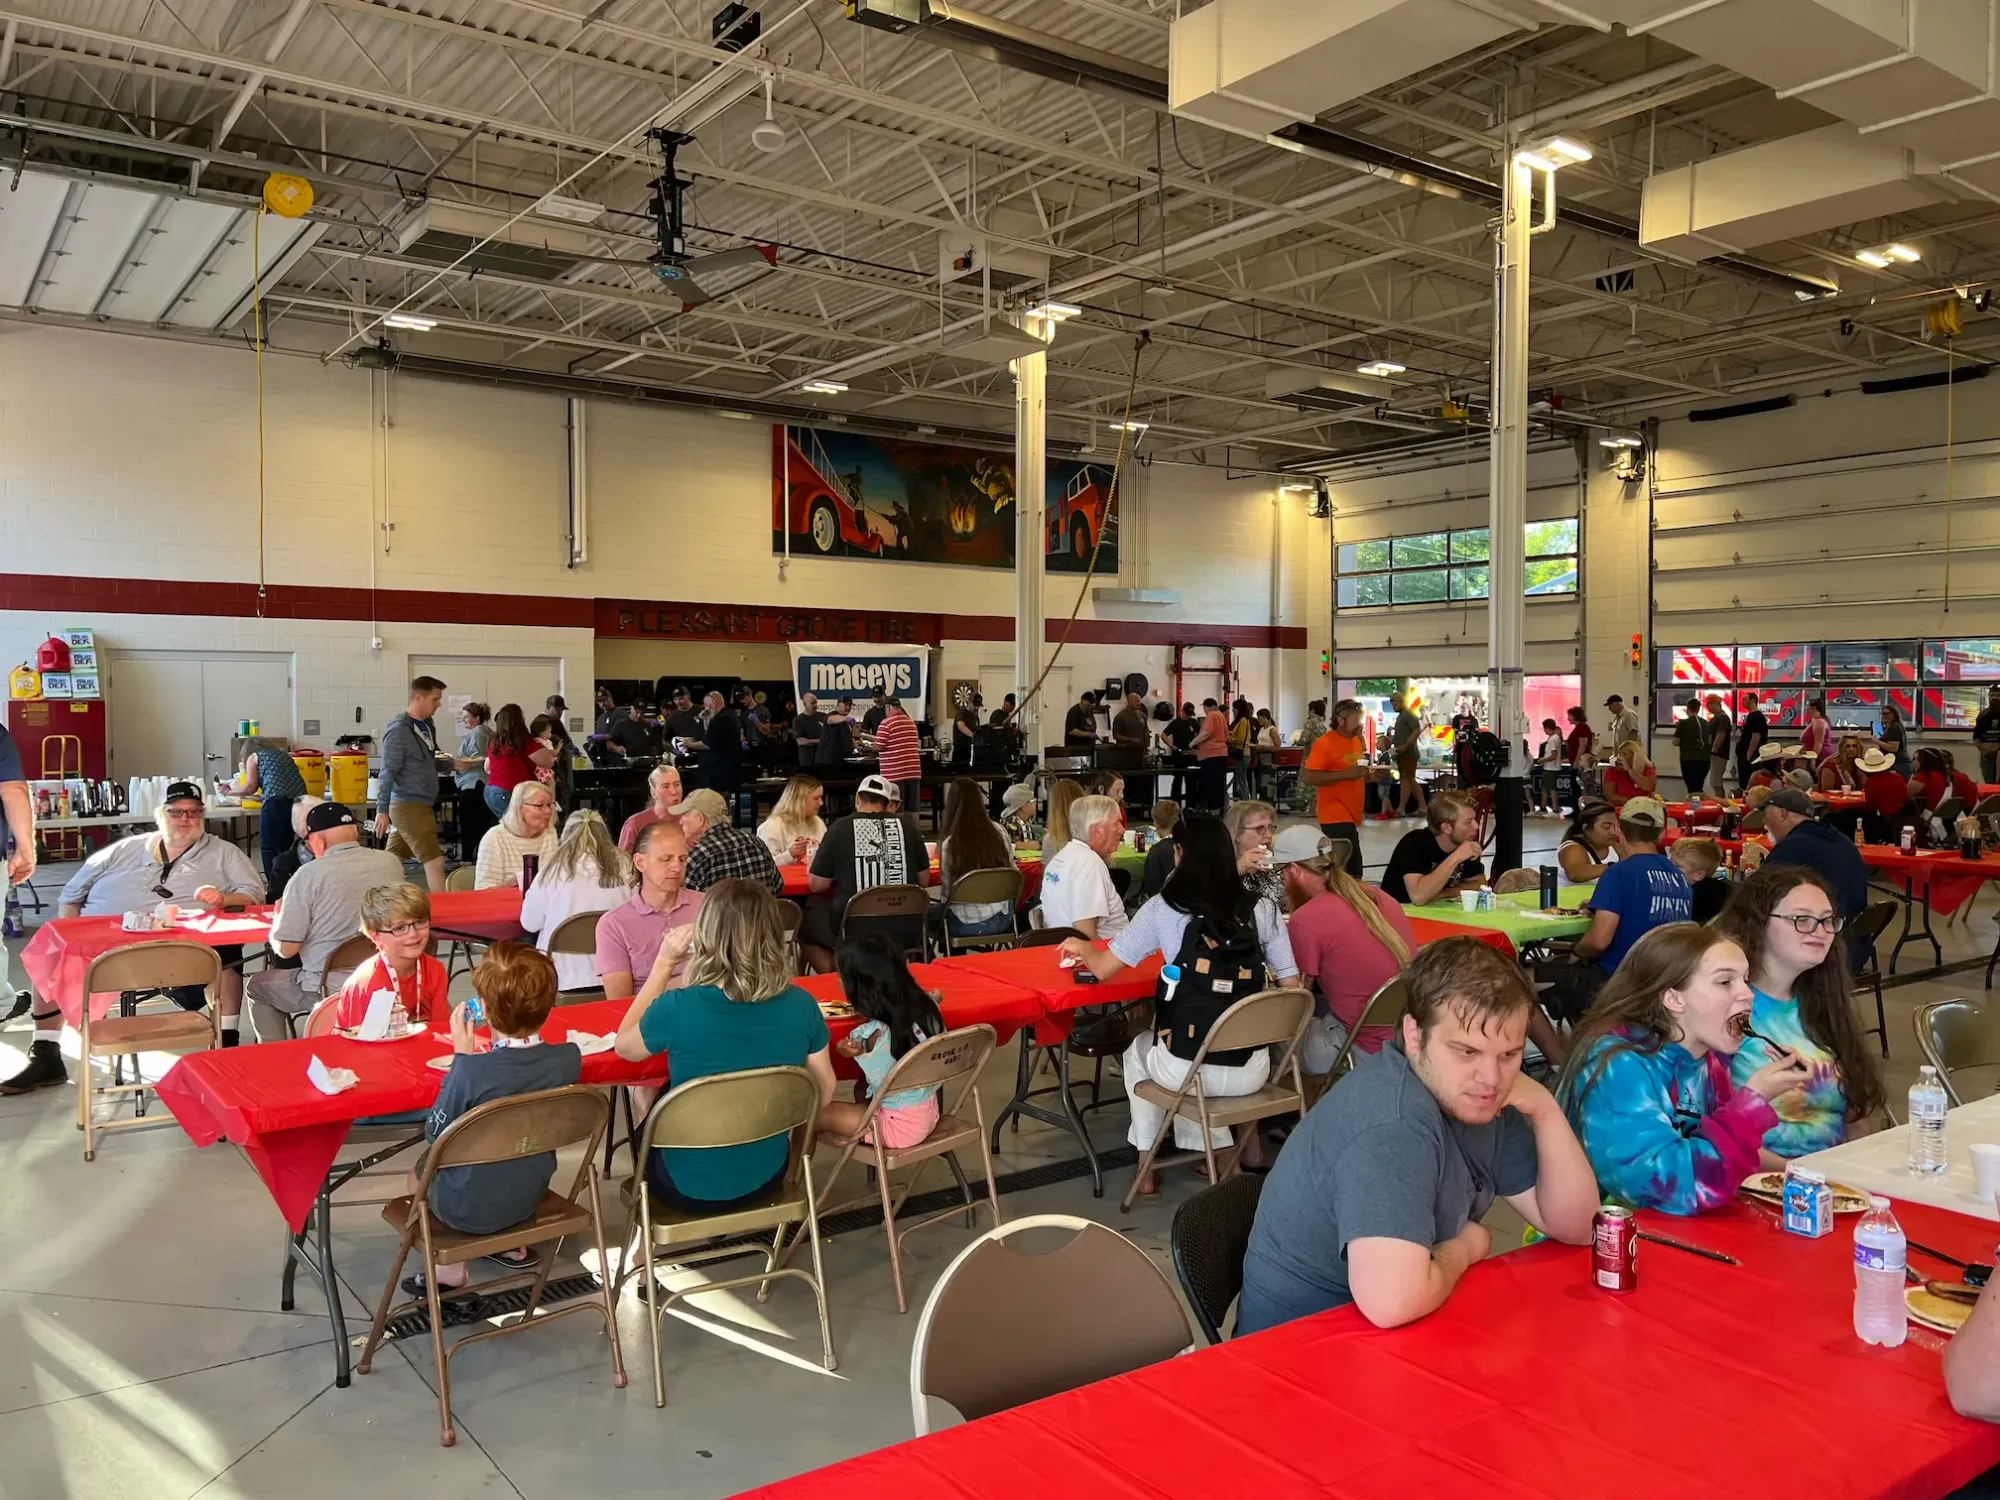 The Pleasant Grove Firehouse is packed with people supporting their annual pancake breakfast